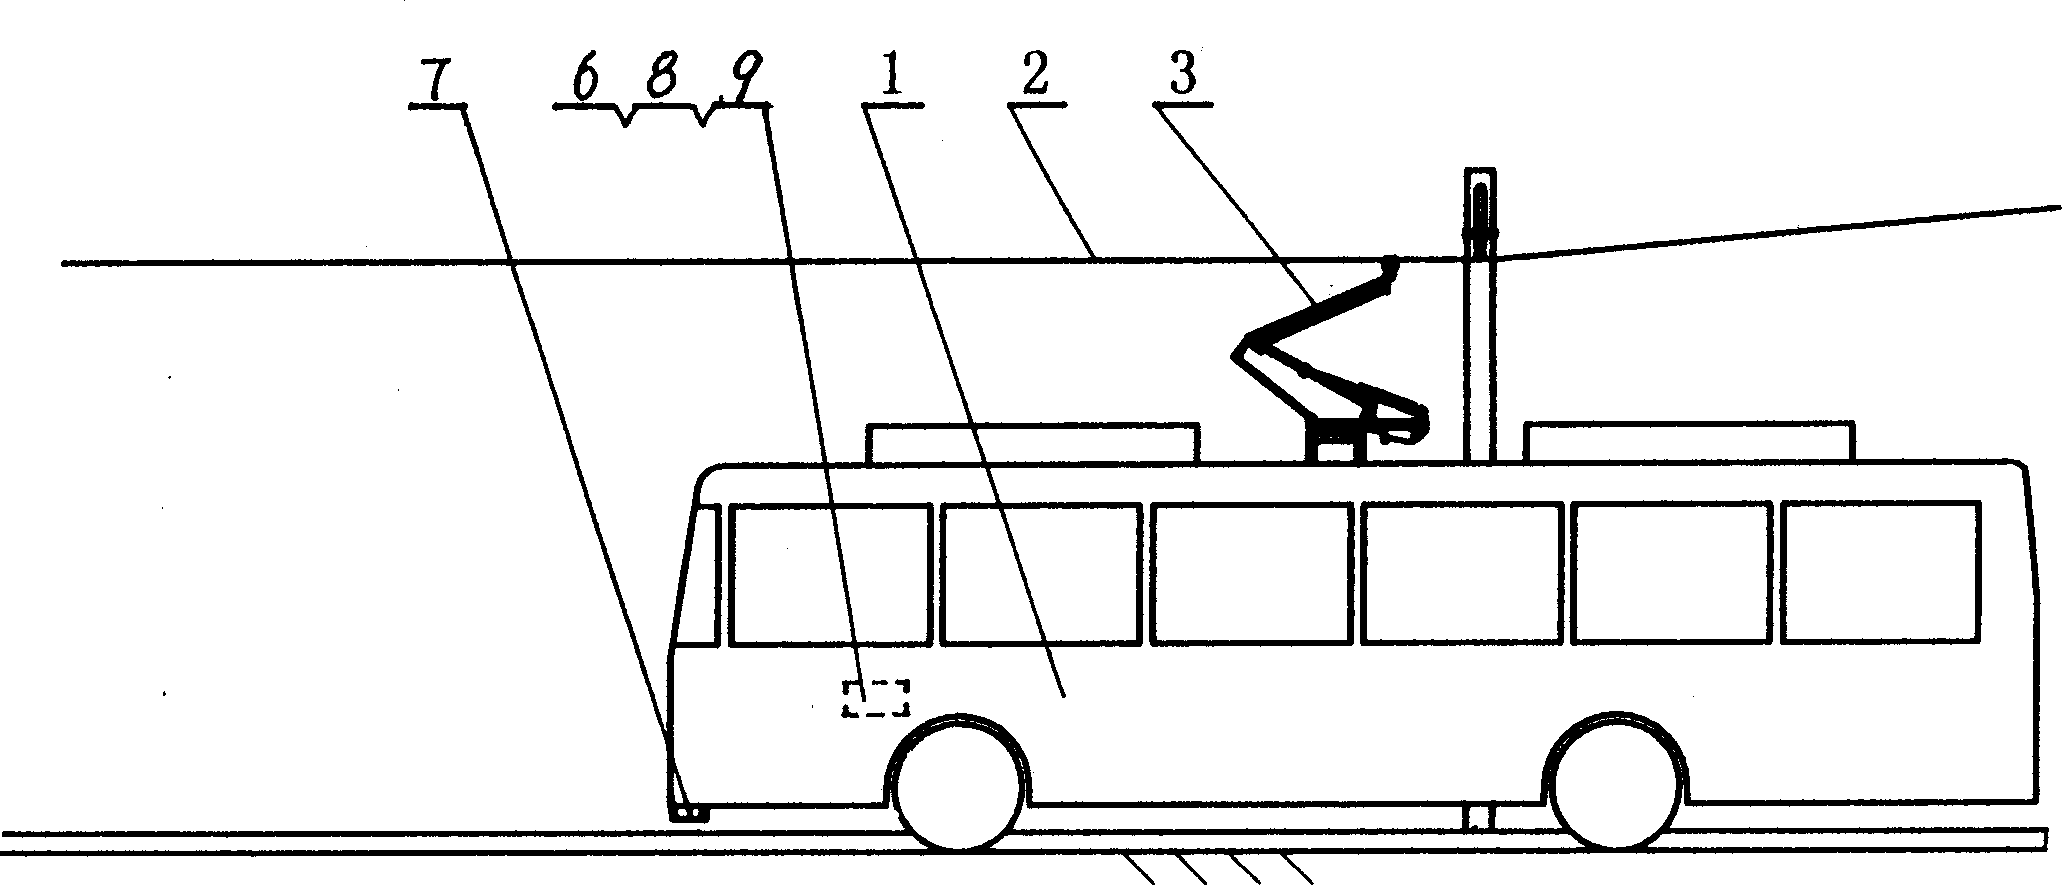 Station-charging trollybus system